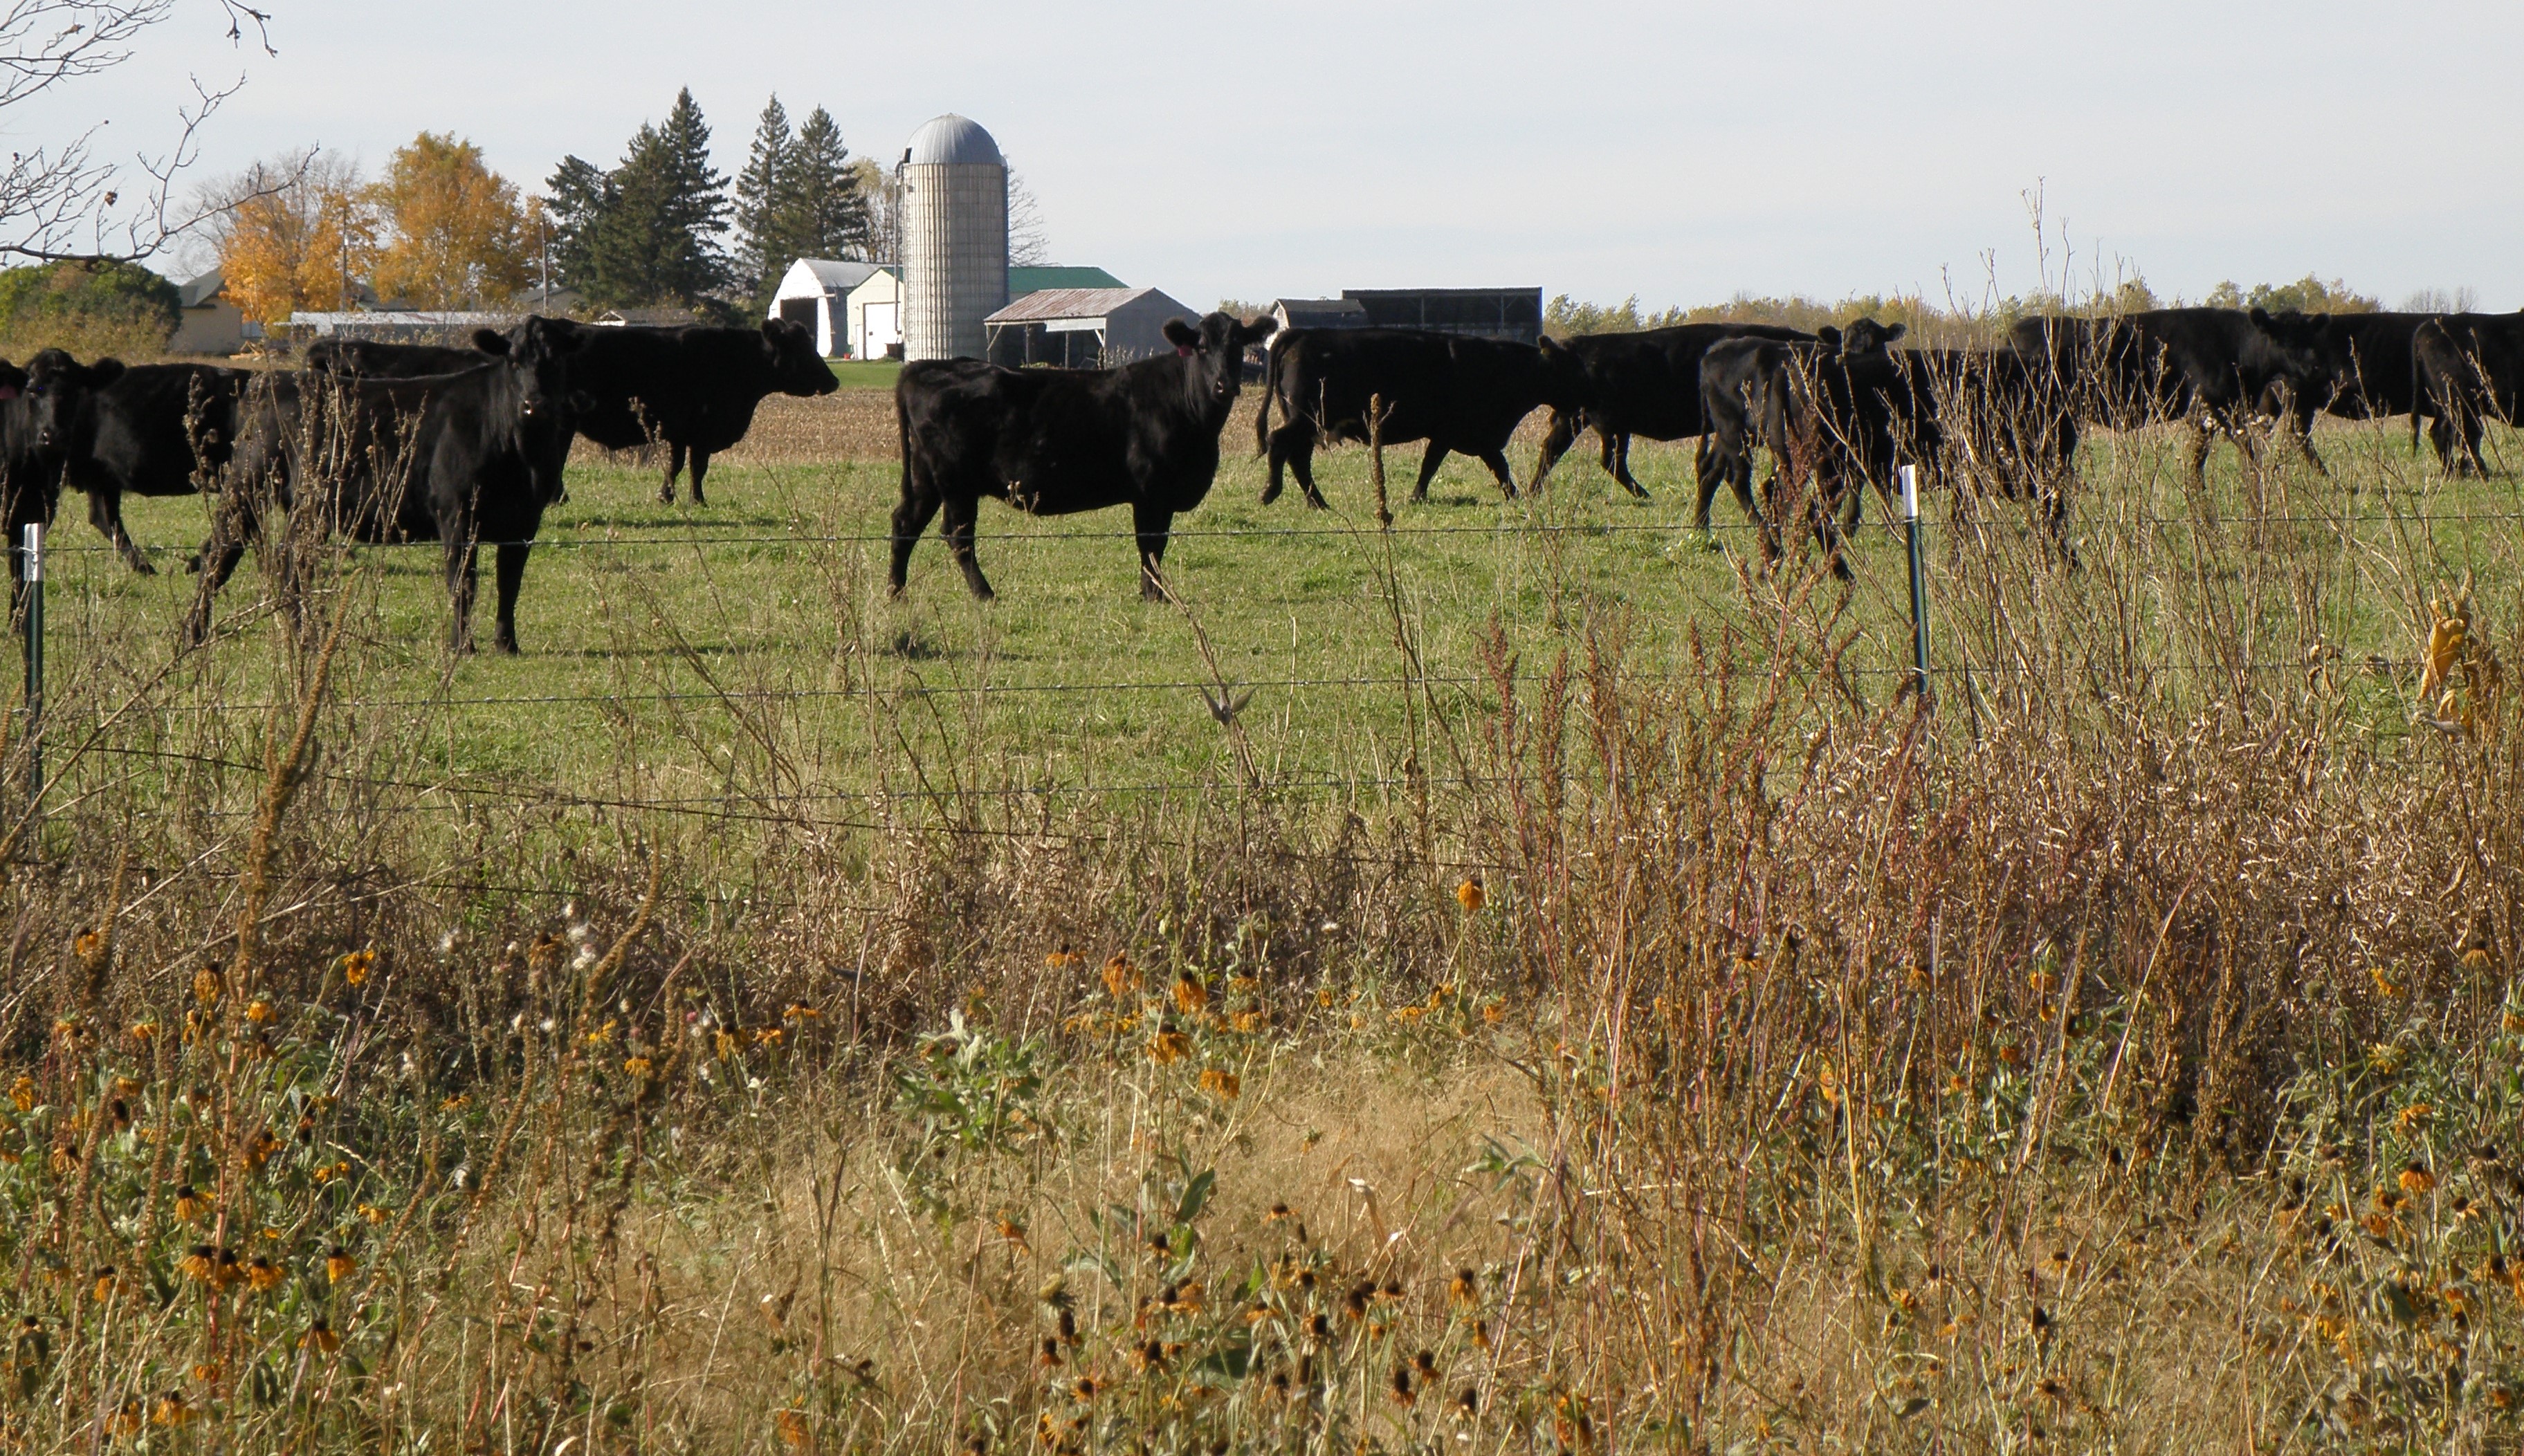 Pasture with cattle and Palmer amaranth in front